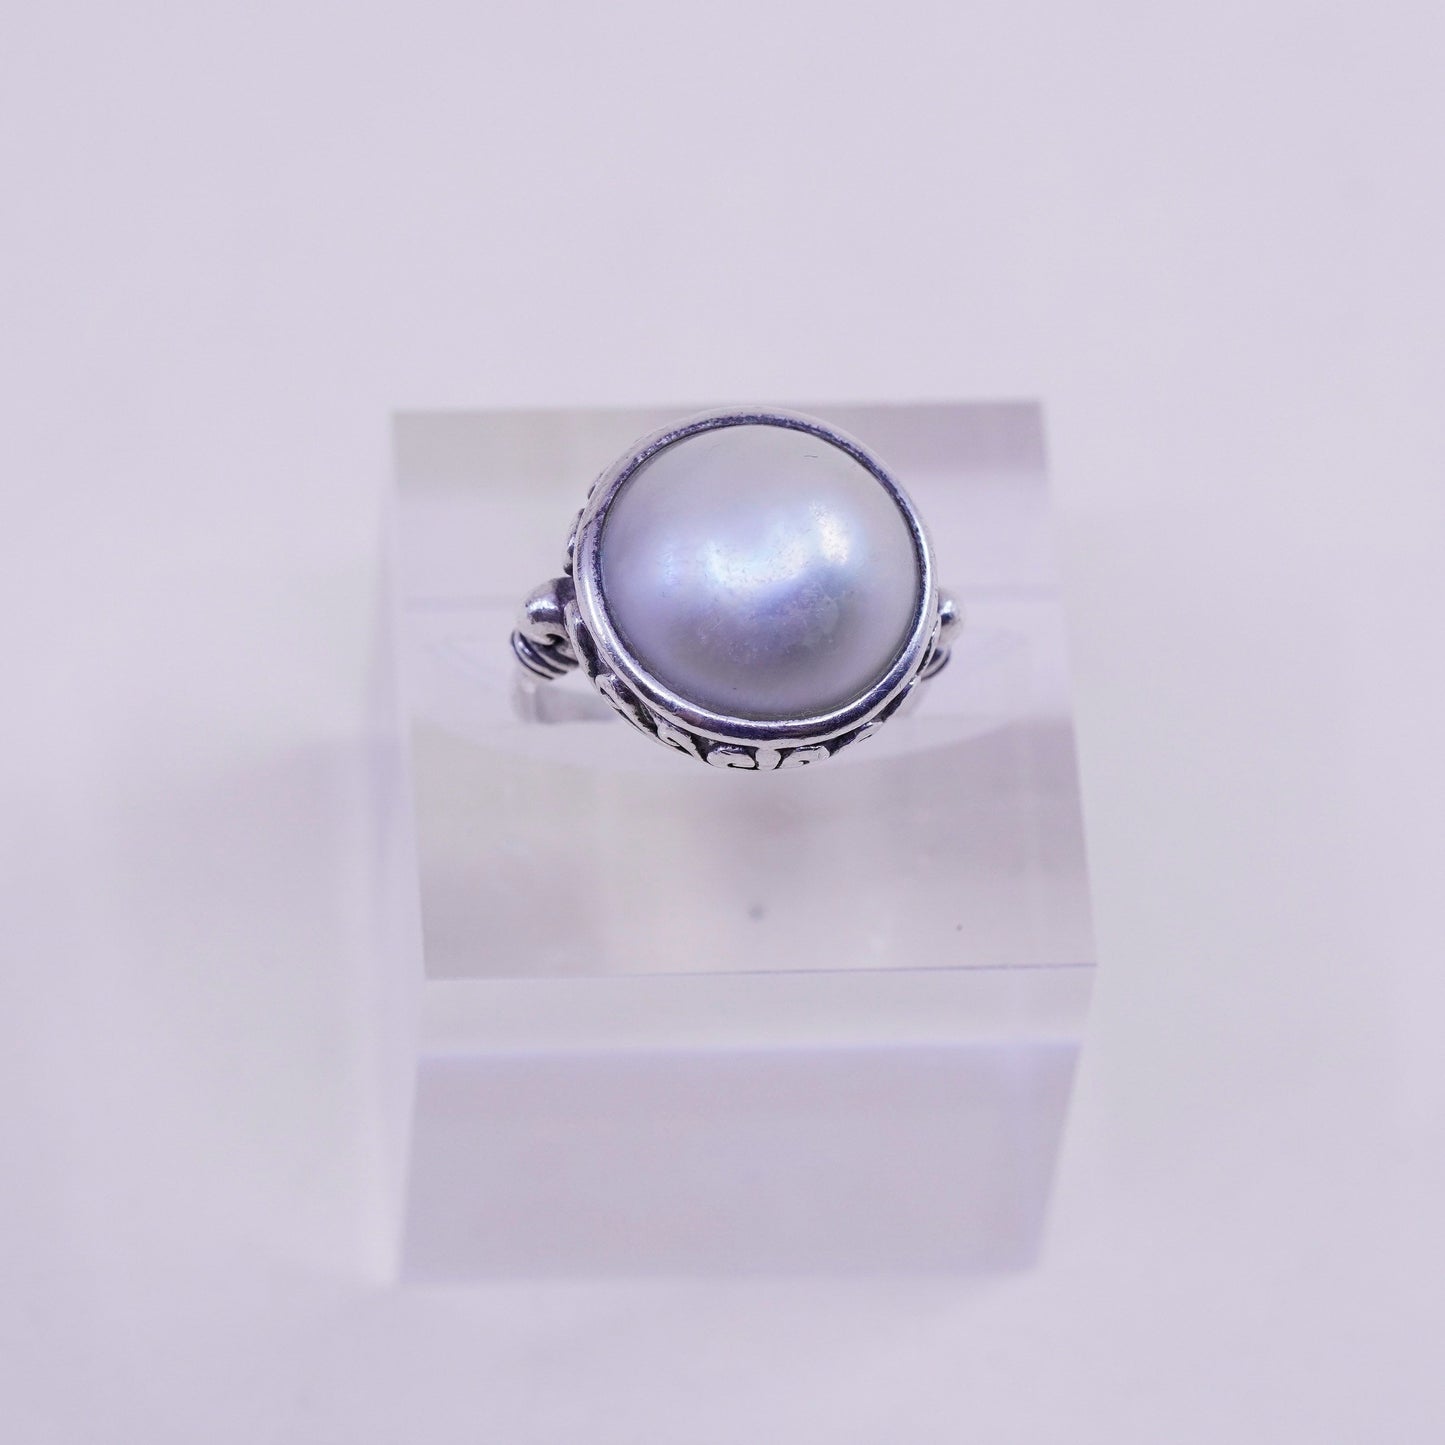 Size 6, vintage Sterling silver handmade ring, modern 925 band with pearl